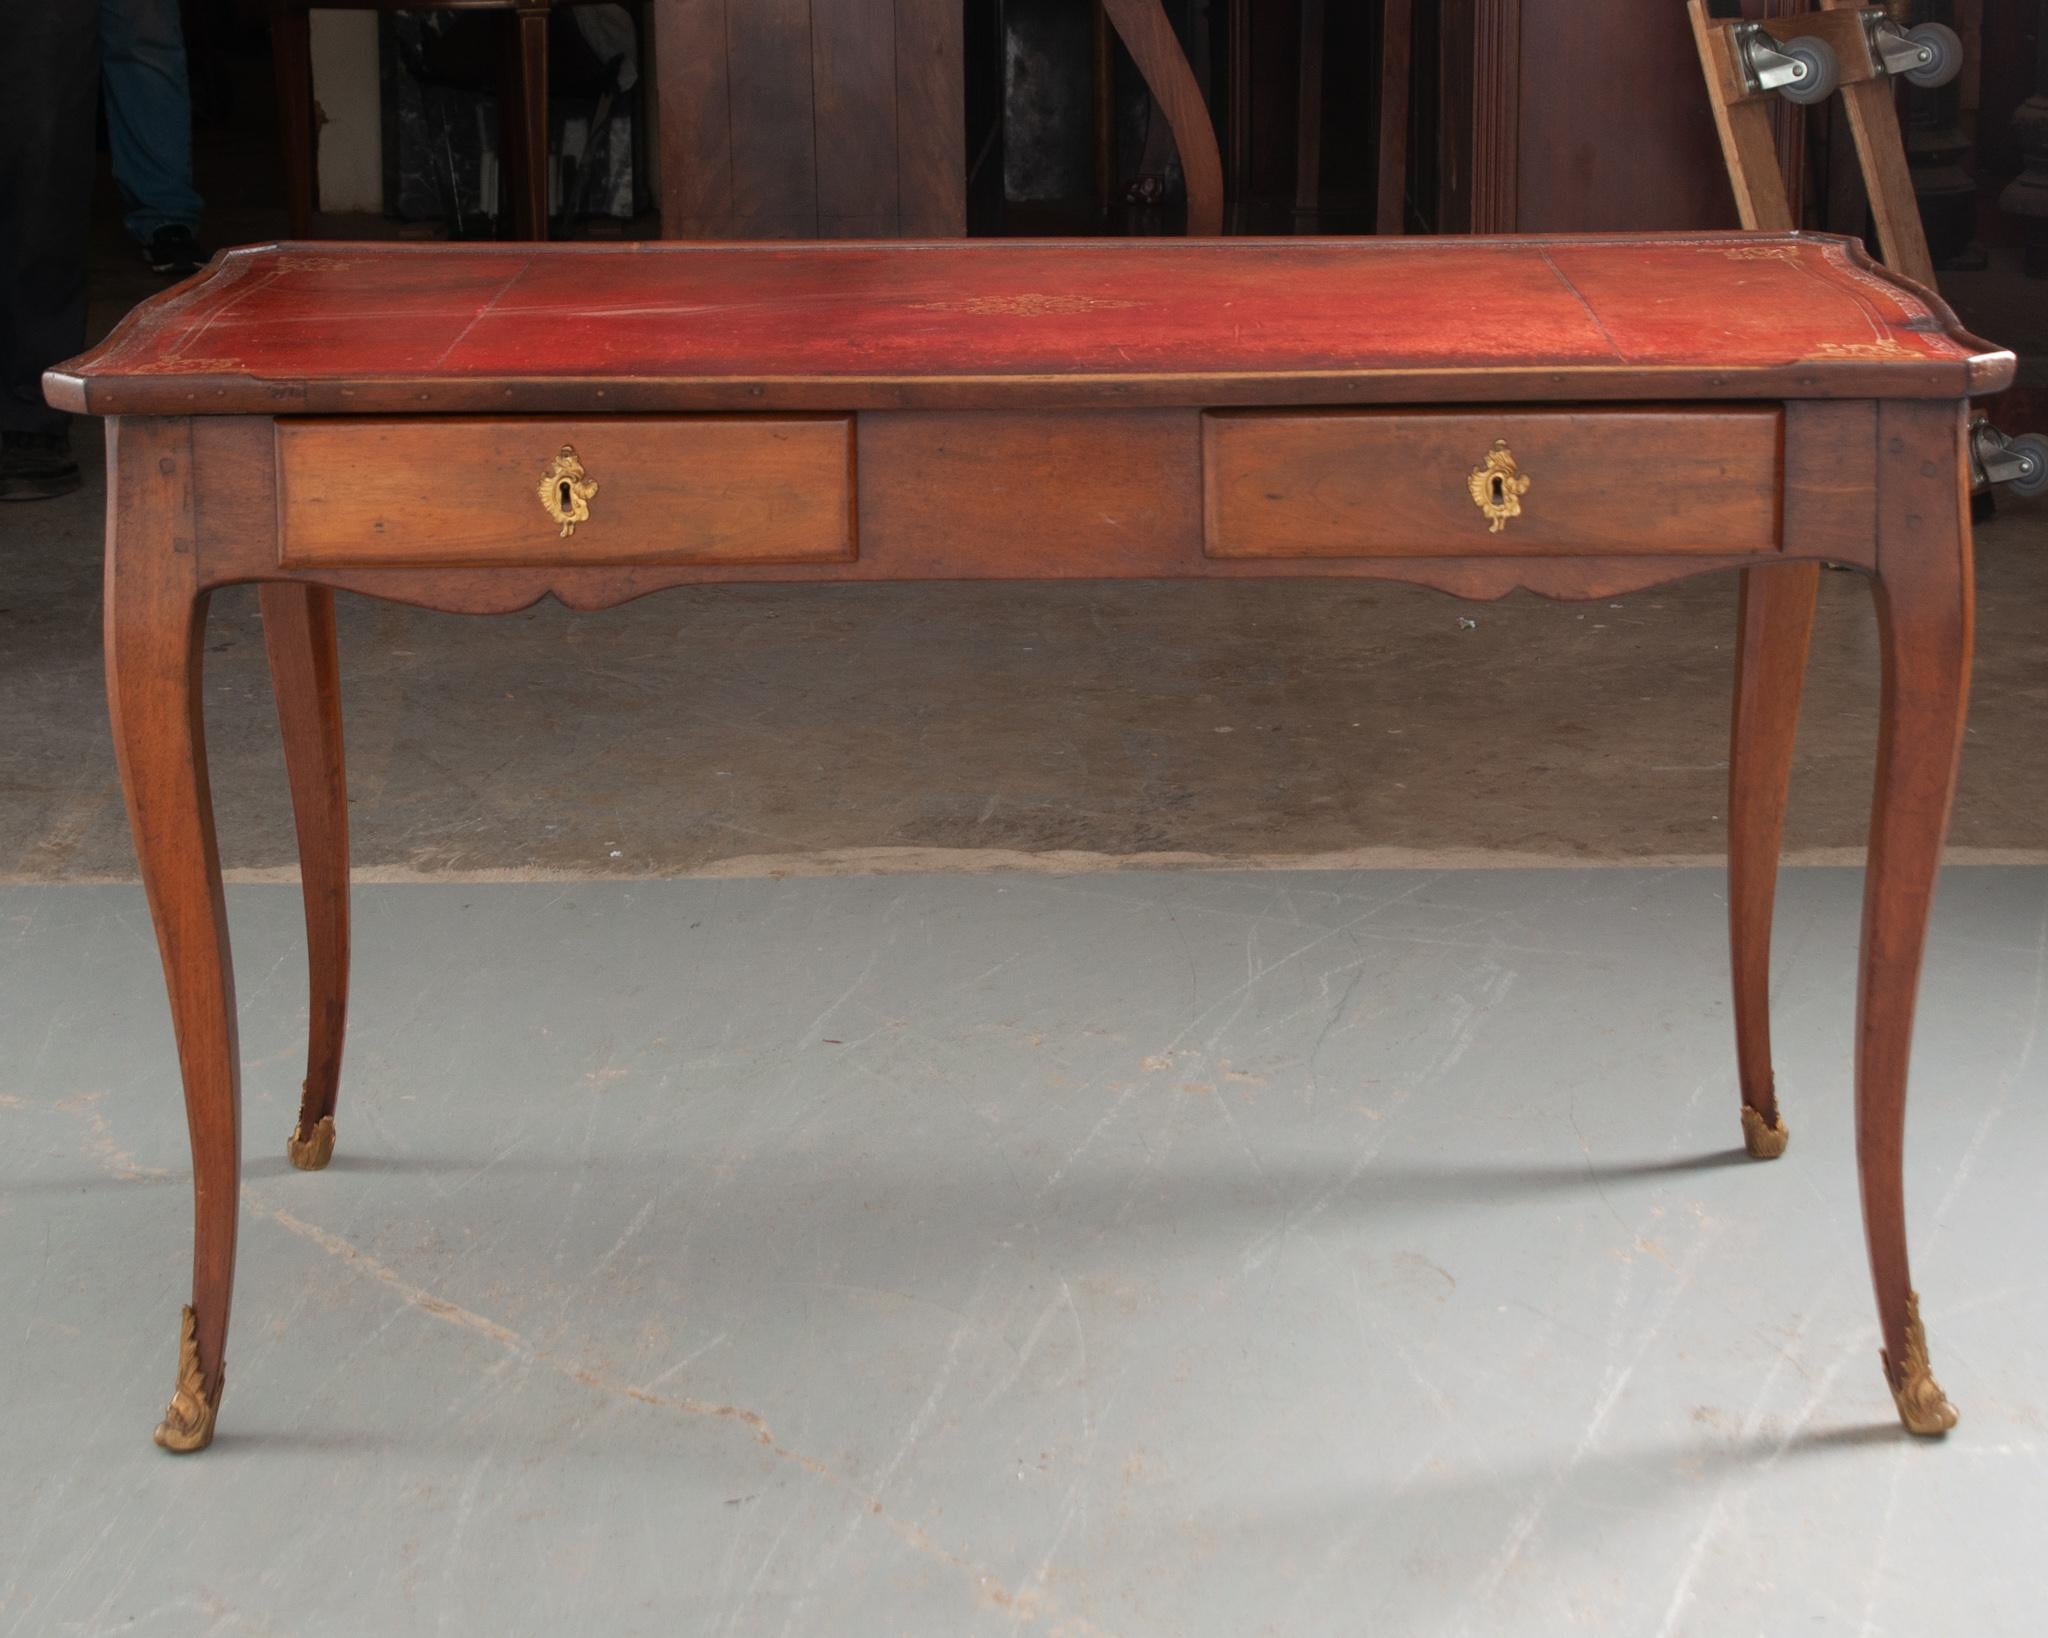 Louis XV style writing desk from France, circa 1840, will elevate any home office or library to the next level of sophistication. Gorgeous red leather writing surface with gold tooling and a breakfront lip provides an inviting space to work at. The